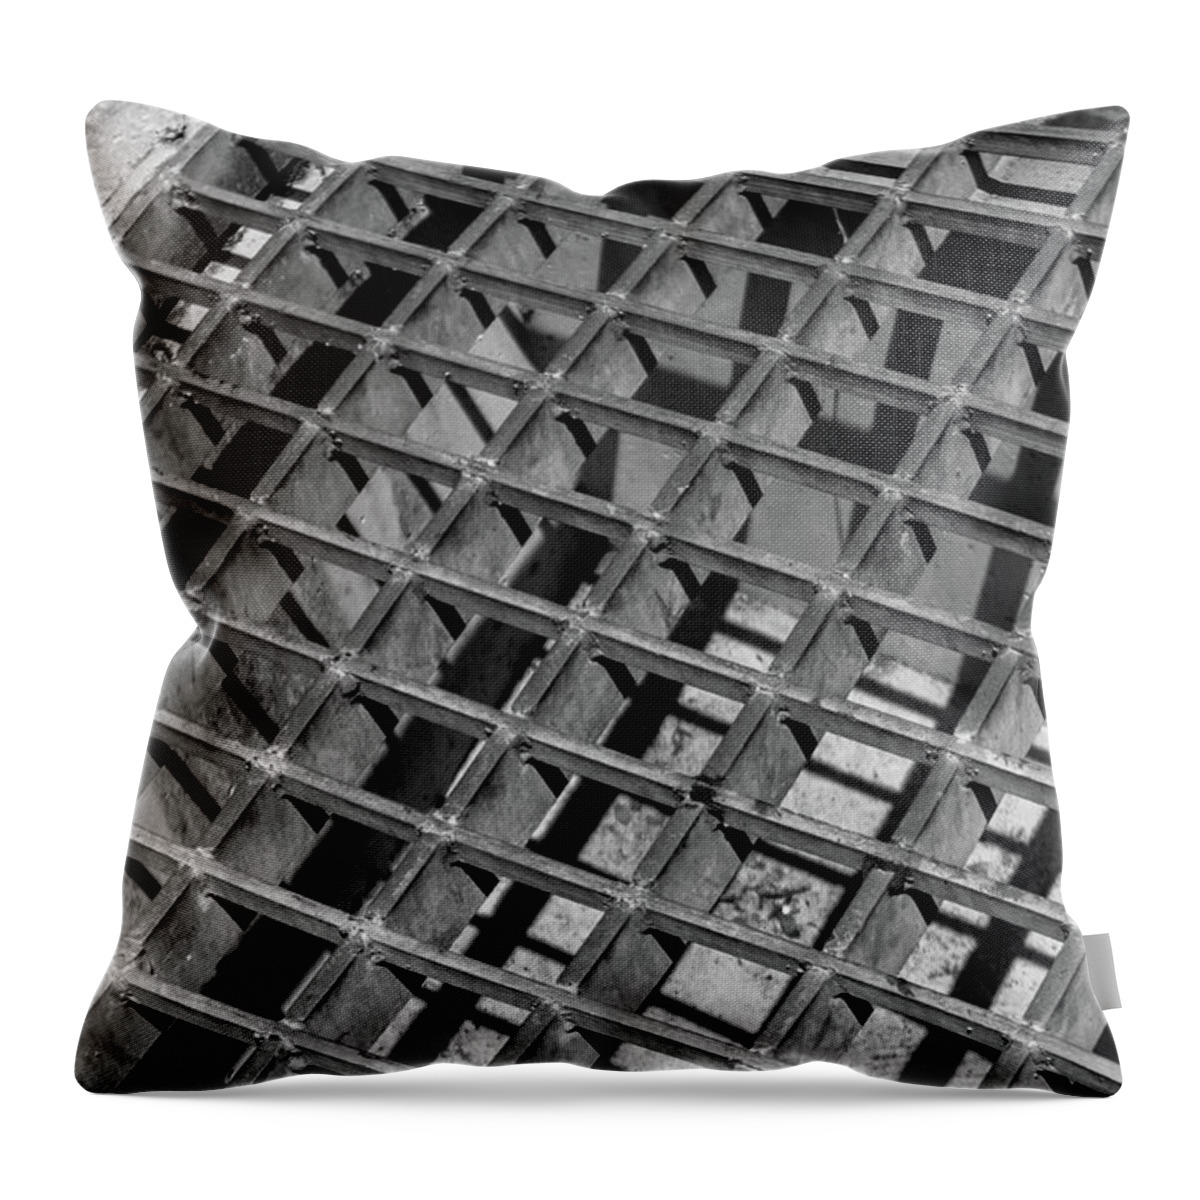 Grate Throw Pillow featuring the photograph Grating by Lauri Novak